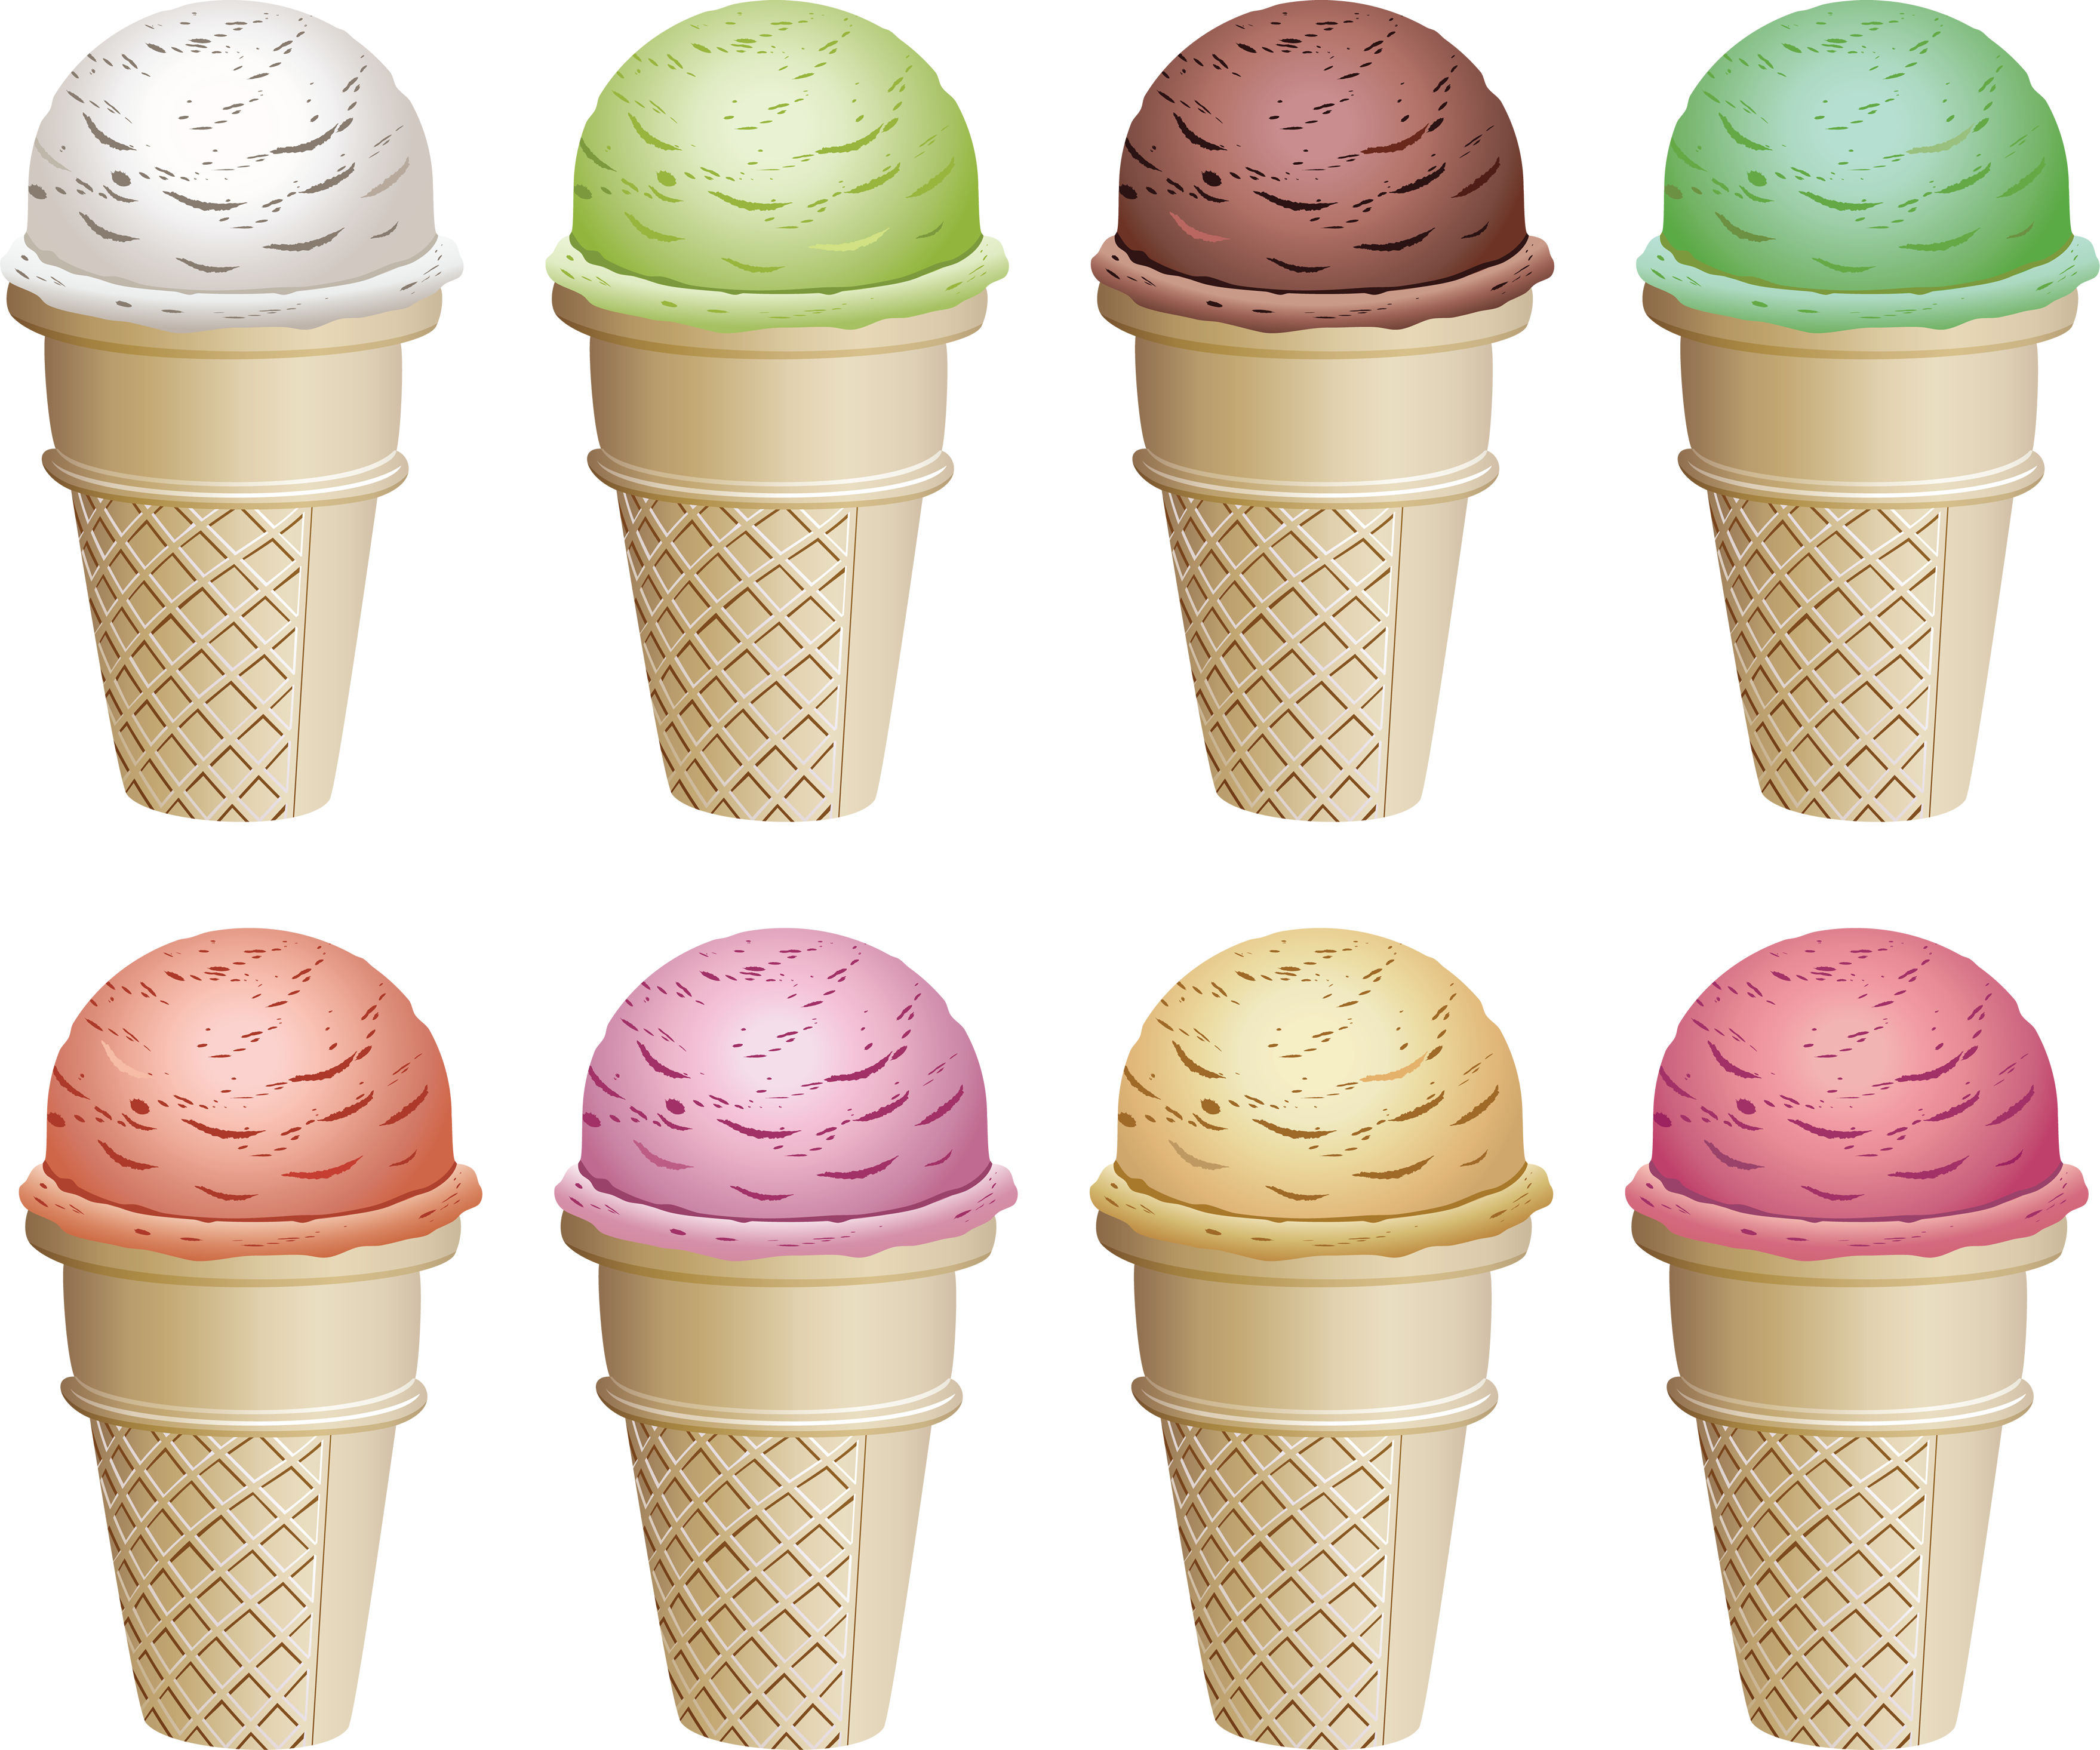 Forty five isolated stock. Corn clipart ice cream